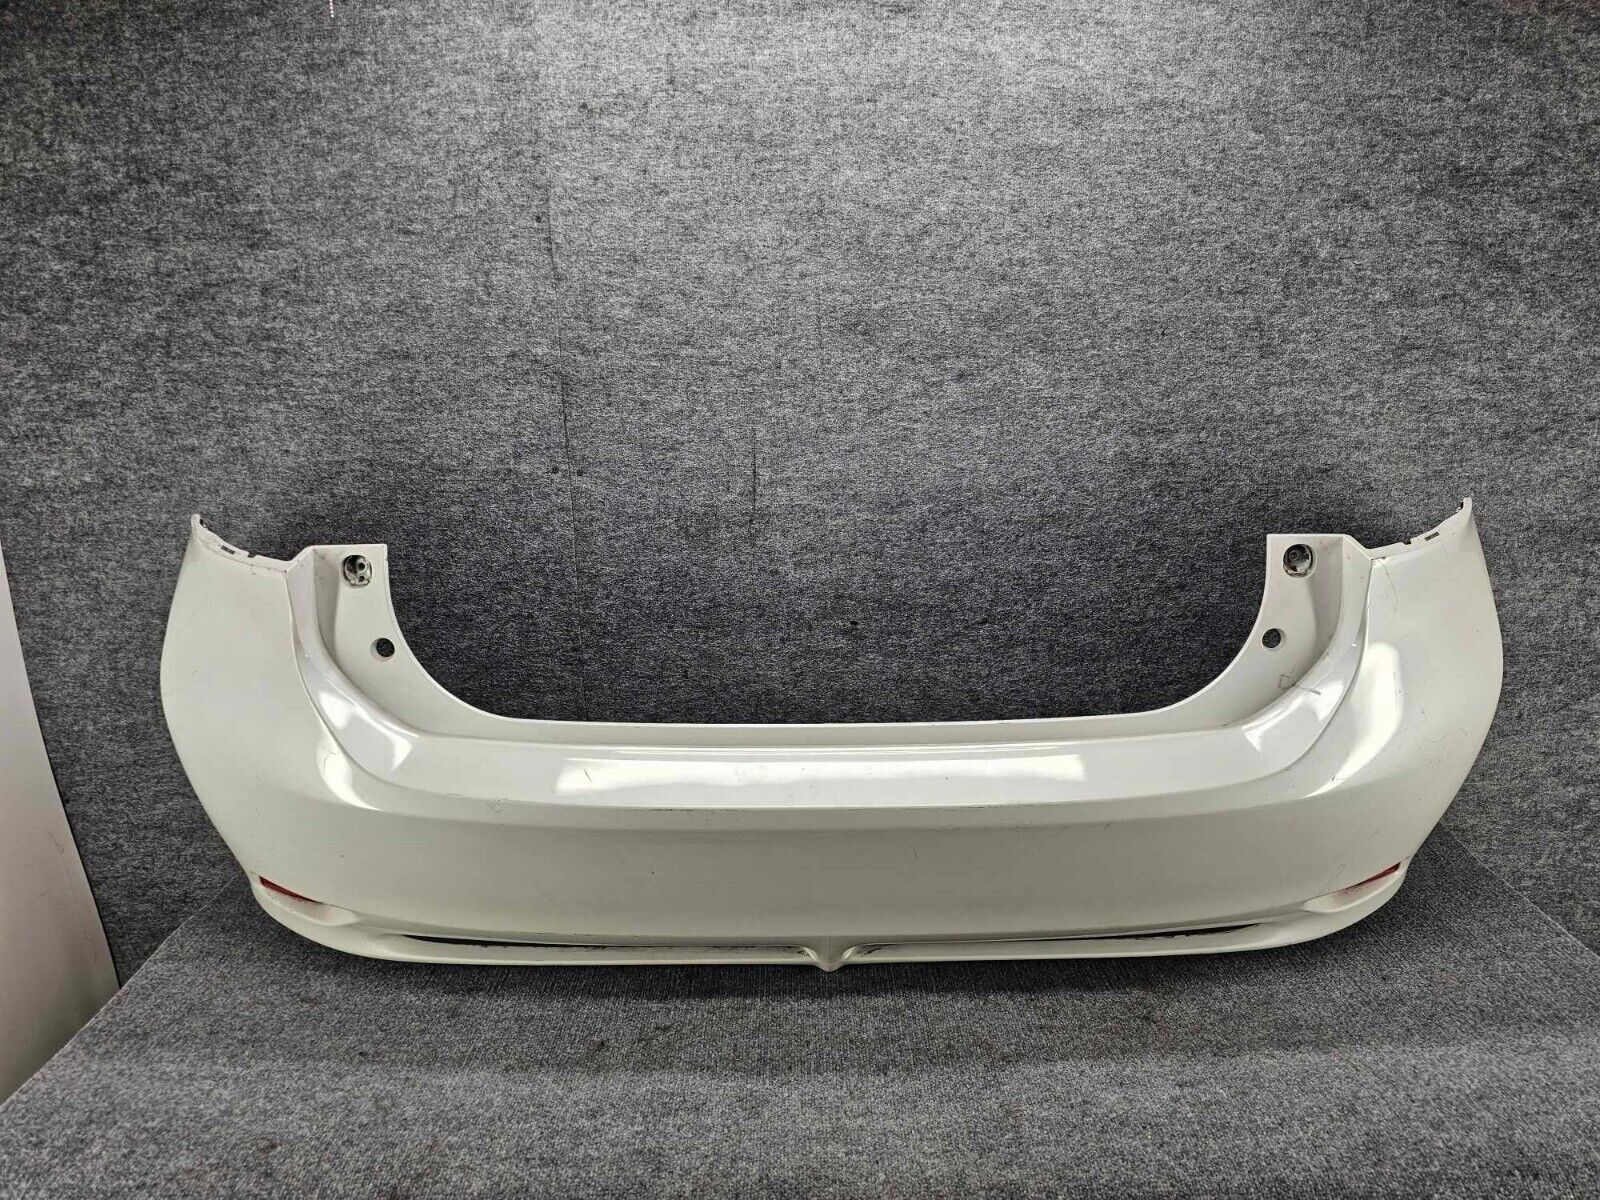 LEXUS 11-13 CT200h COMPLETE REAR BUMPER COVER ASSEMBLY OEM